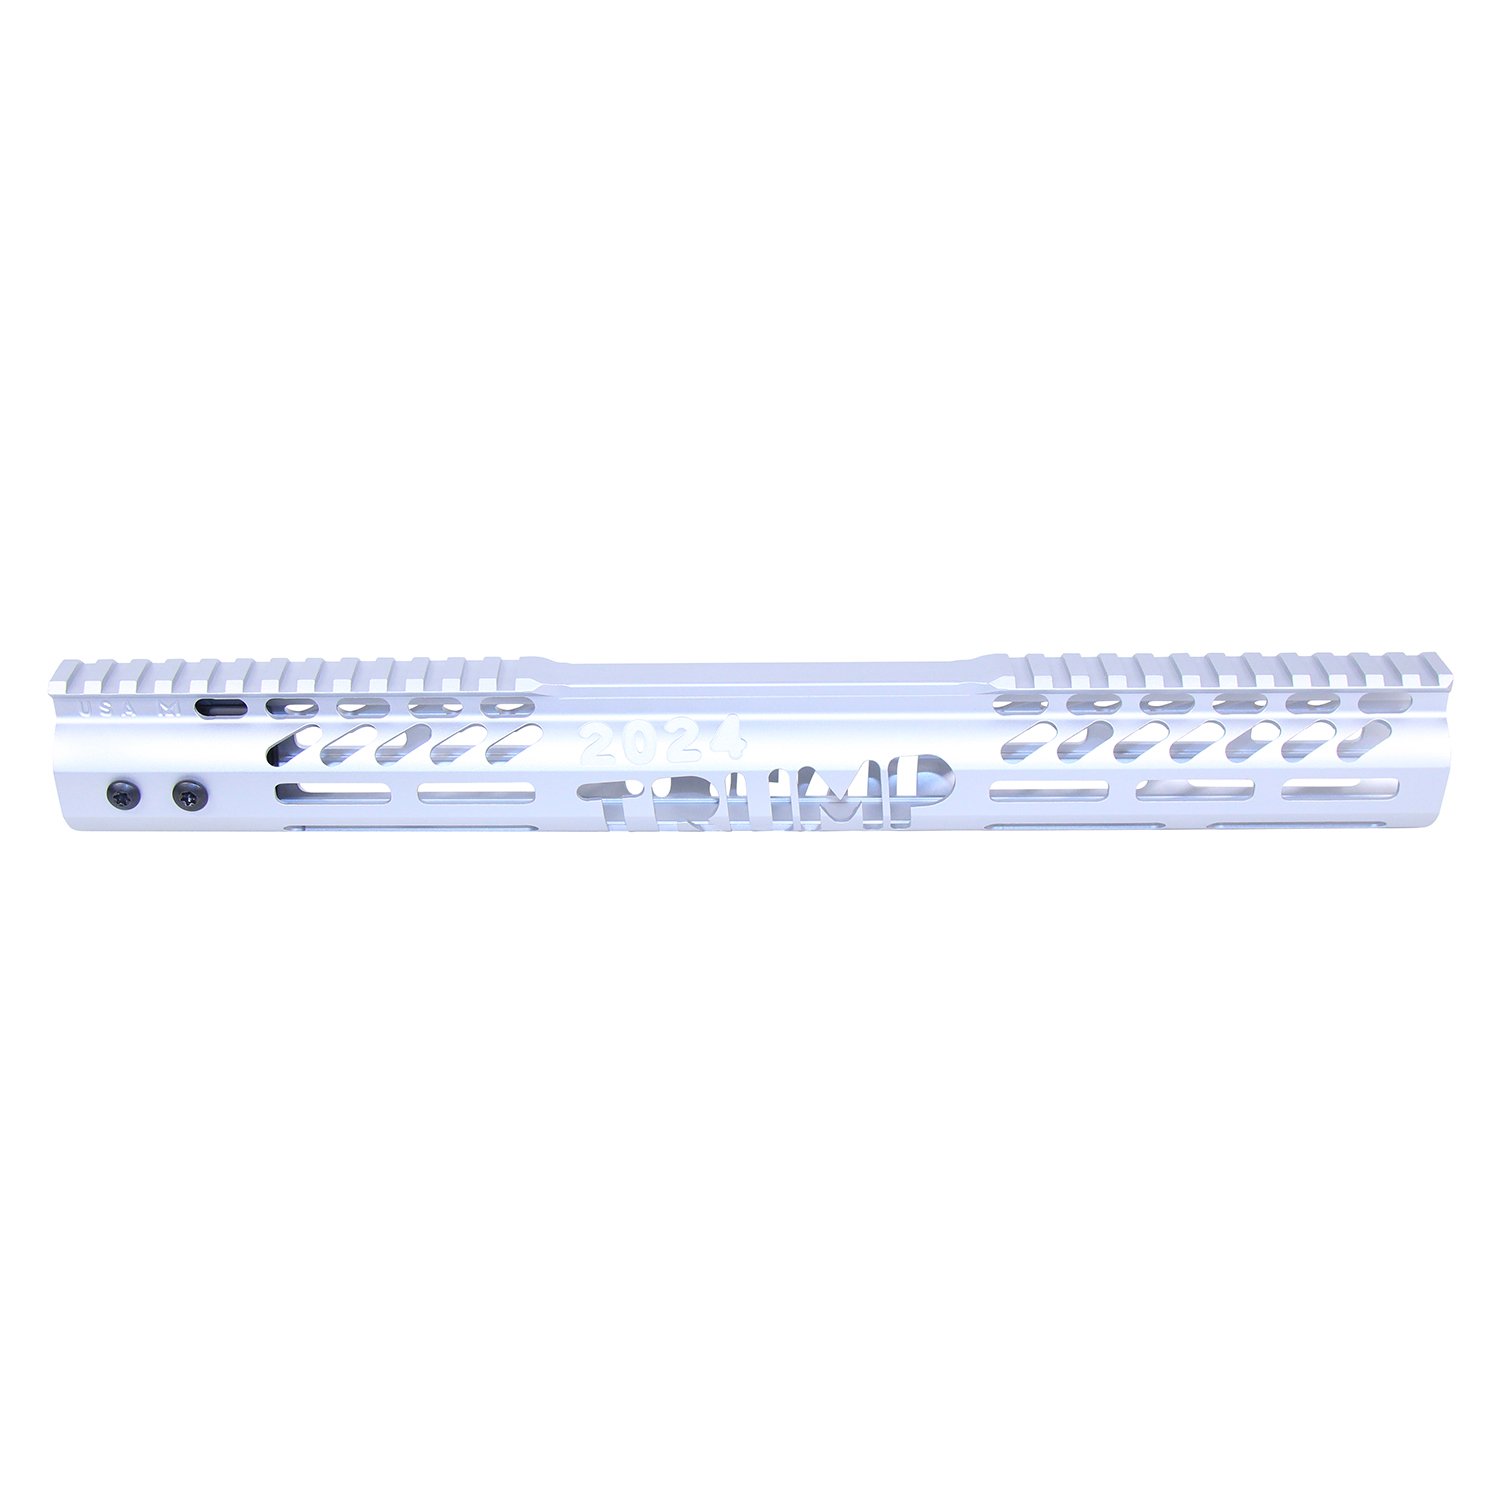 15" "Trump Series" Limited Edition M-LOK System Free Floating Handguard With Monolithic Top Rail (Anodized Clear)